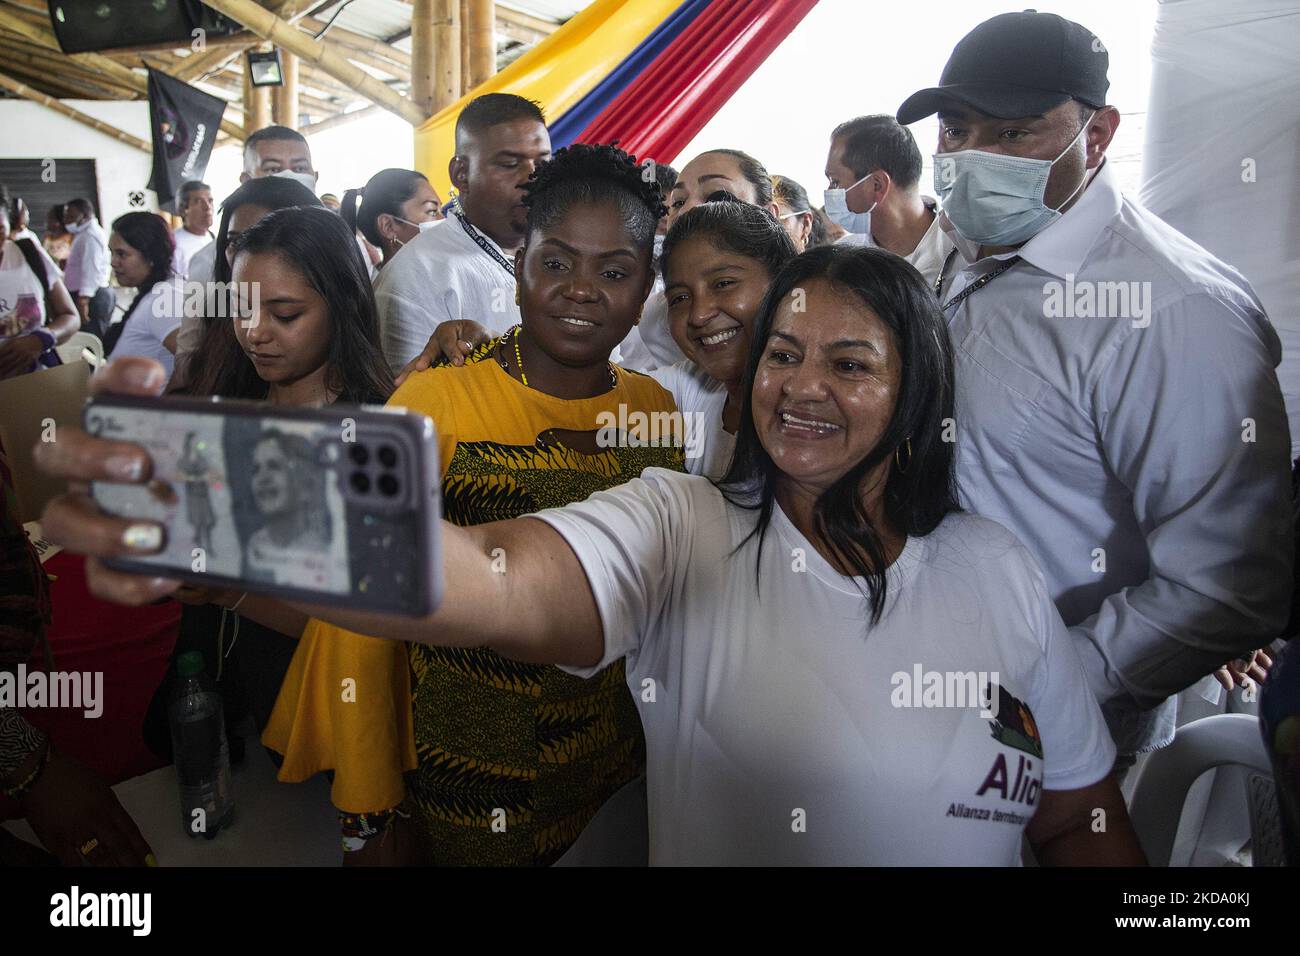 Election campaign act of the vice-presidential candidate for the coalition Pacto Histórico, Francia Márquez, in Santander de Quilichao, Cauca, on May 14, 2022. (Photo by Robert Bonet/NurPhoto) Stock Photo